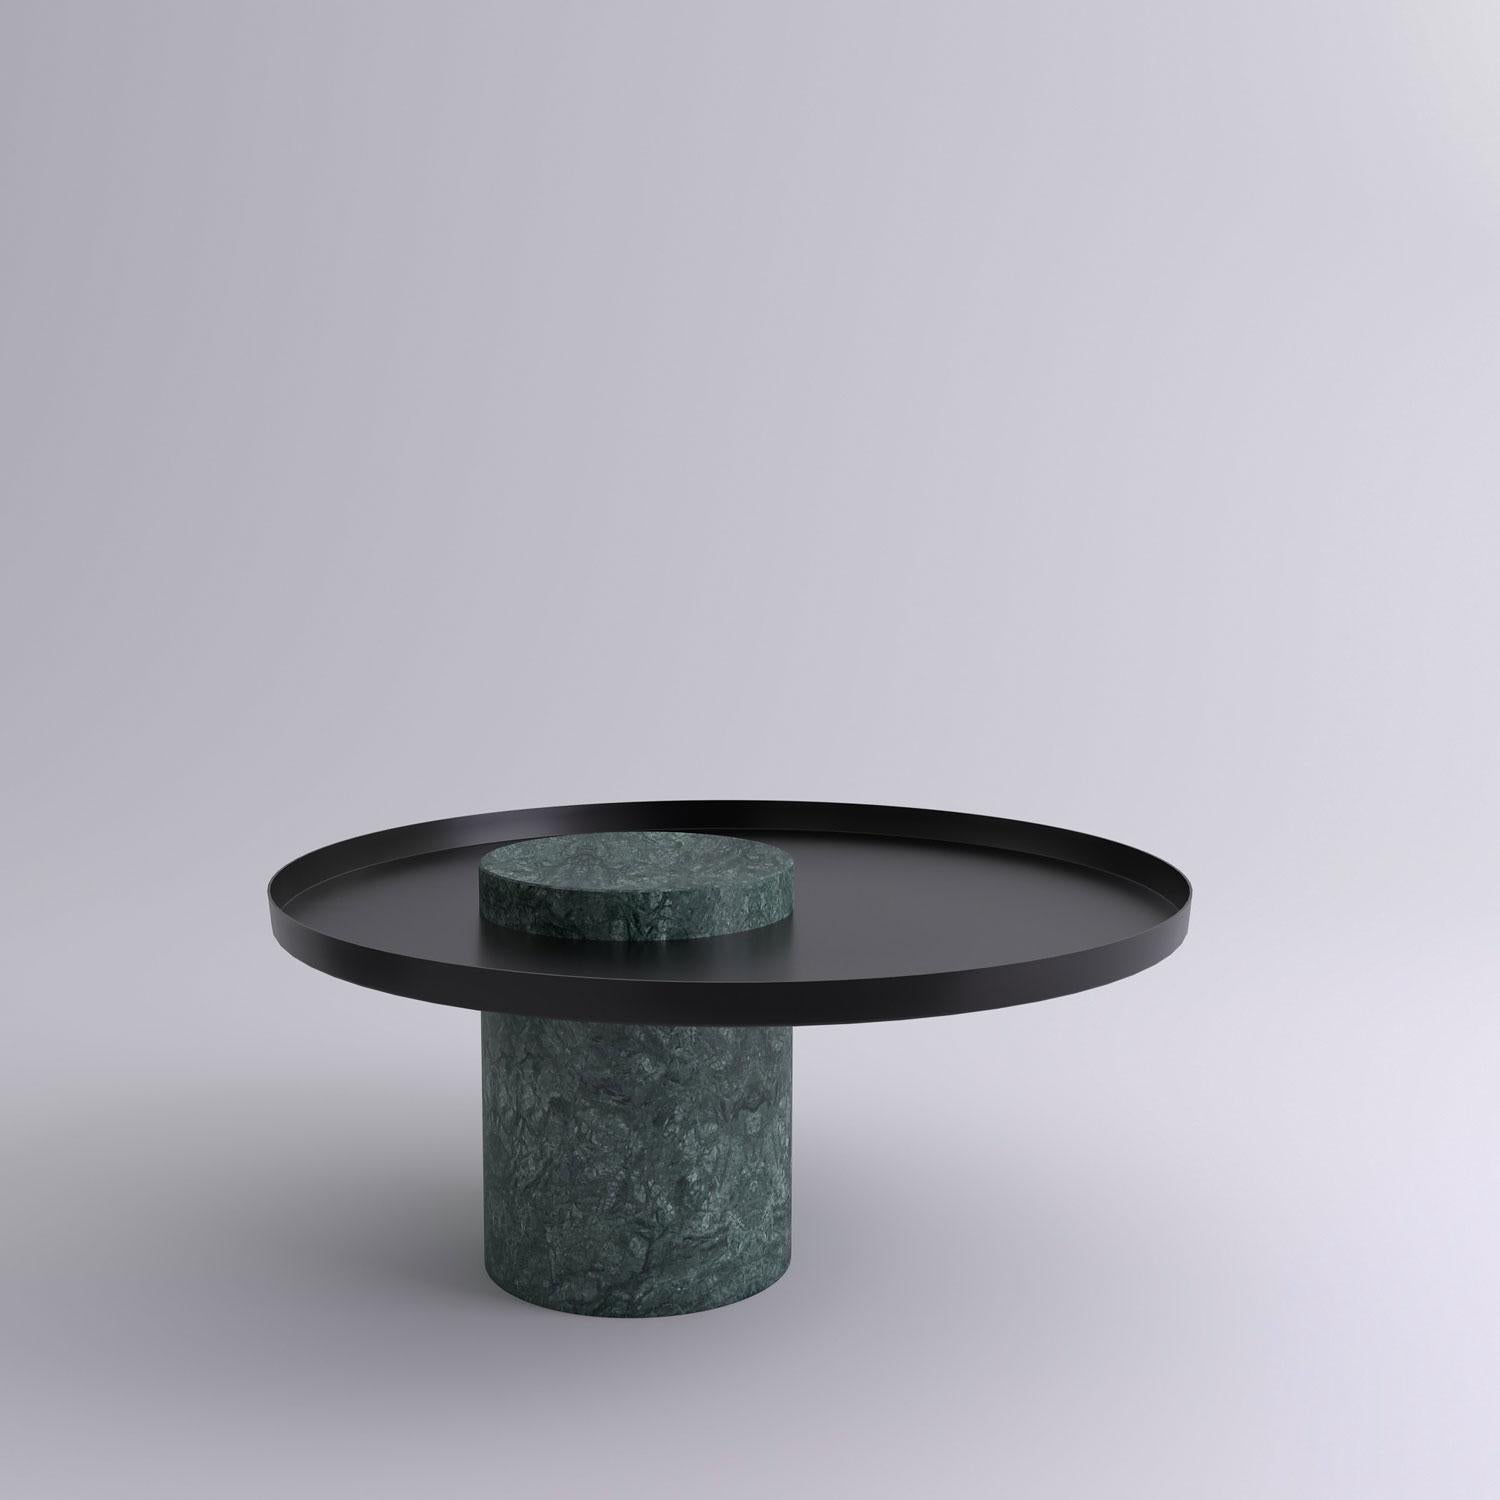 Low indian green marble contemporary guéridon, Sebastian Herkner
Dimensions: D 70 x H 33 cm
Materials: Indian Green marble, black metal tray

The salute table exists in 3 sizes, 4 different marble stones for the column and 5 different finishes